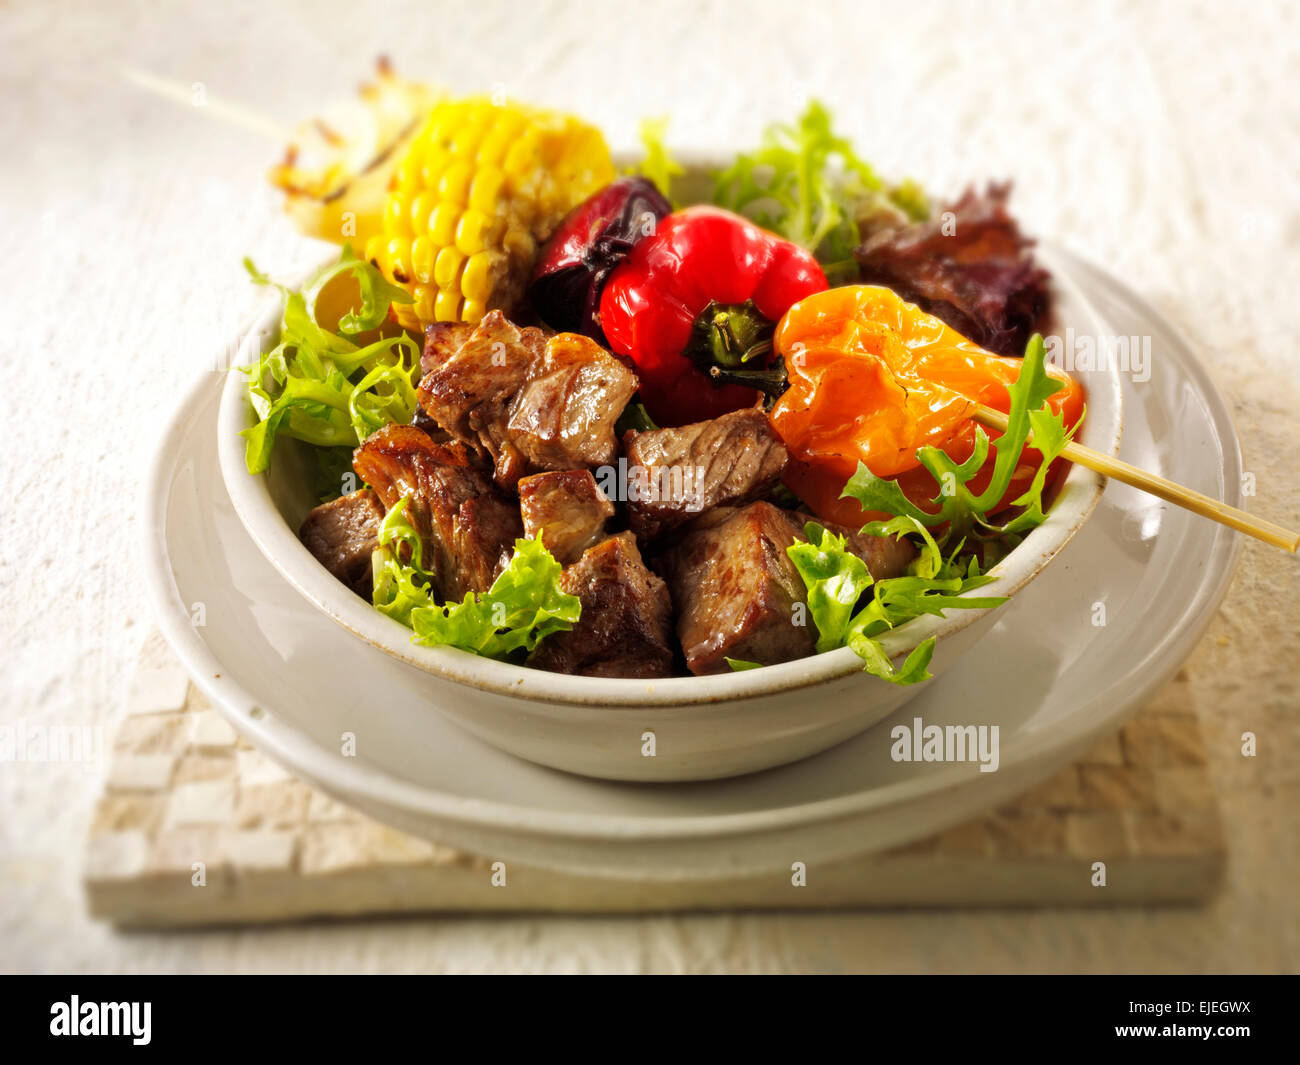 Barbecue beef steak brochettes and vegetables Stock Photo